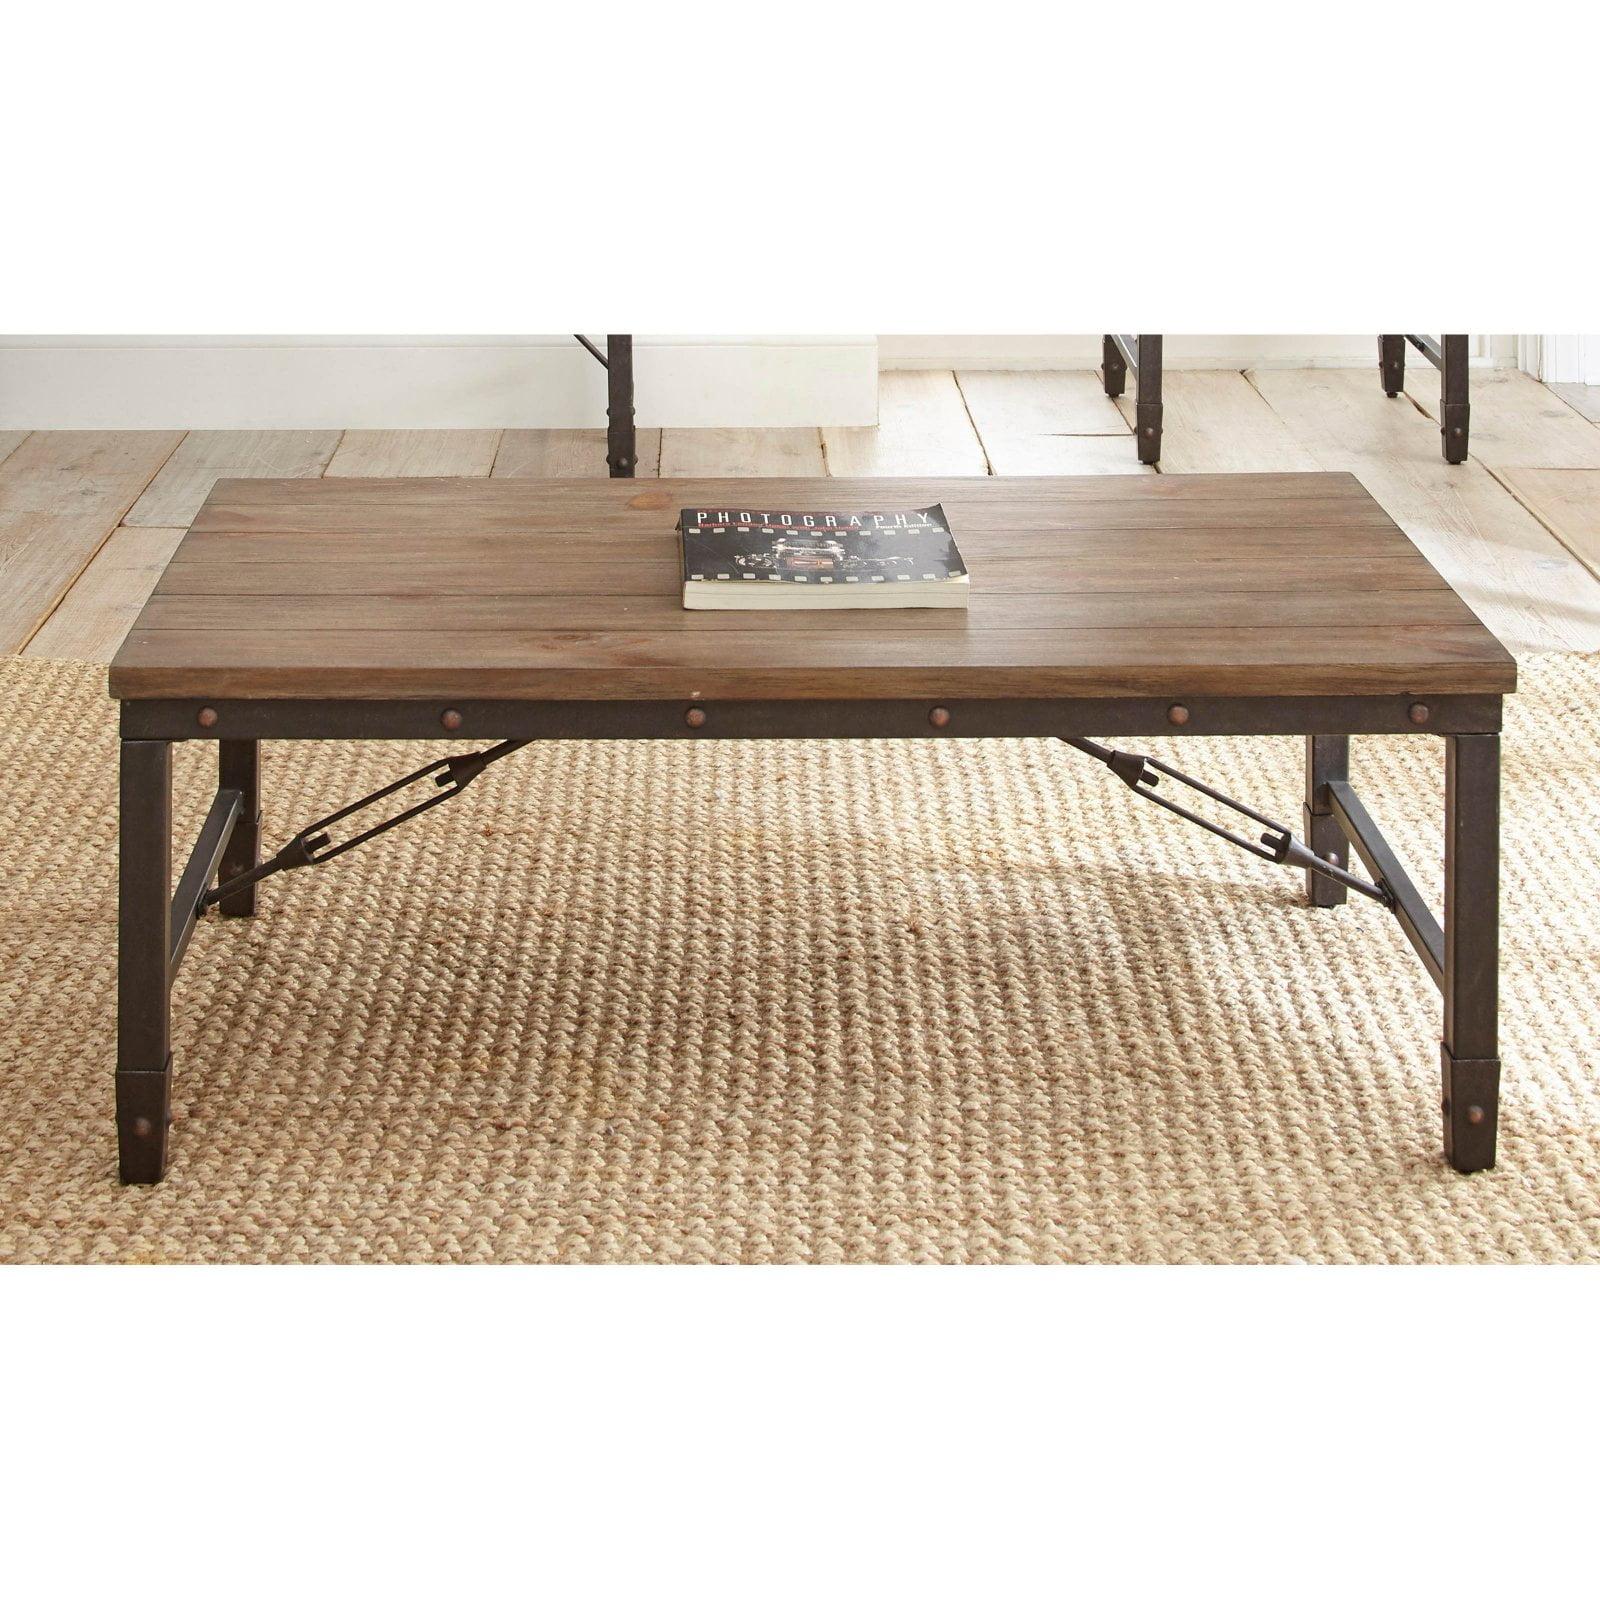 Riveted Antique Tobacco 48" Industrial Coffee Table with Plank-Effect Top